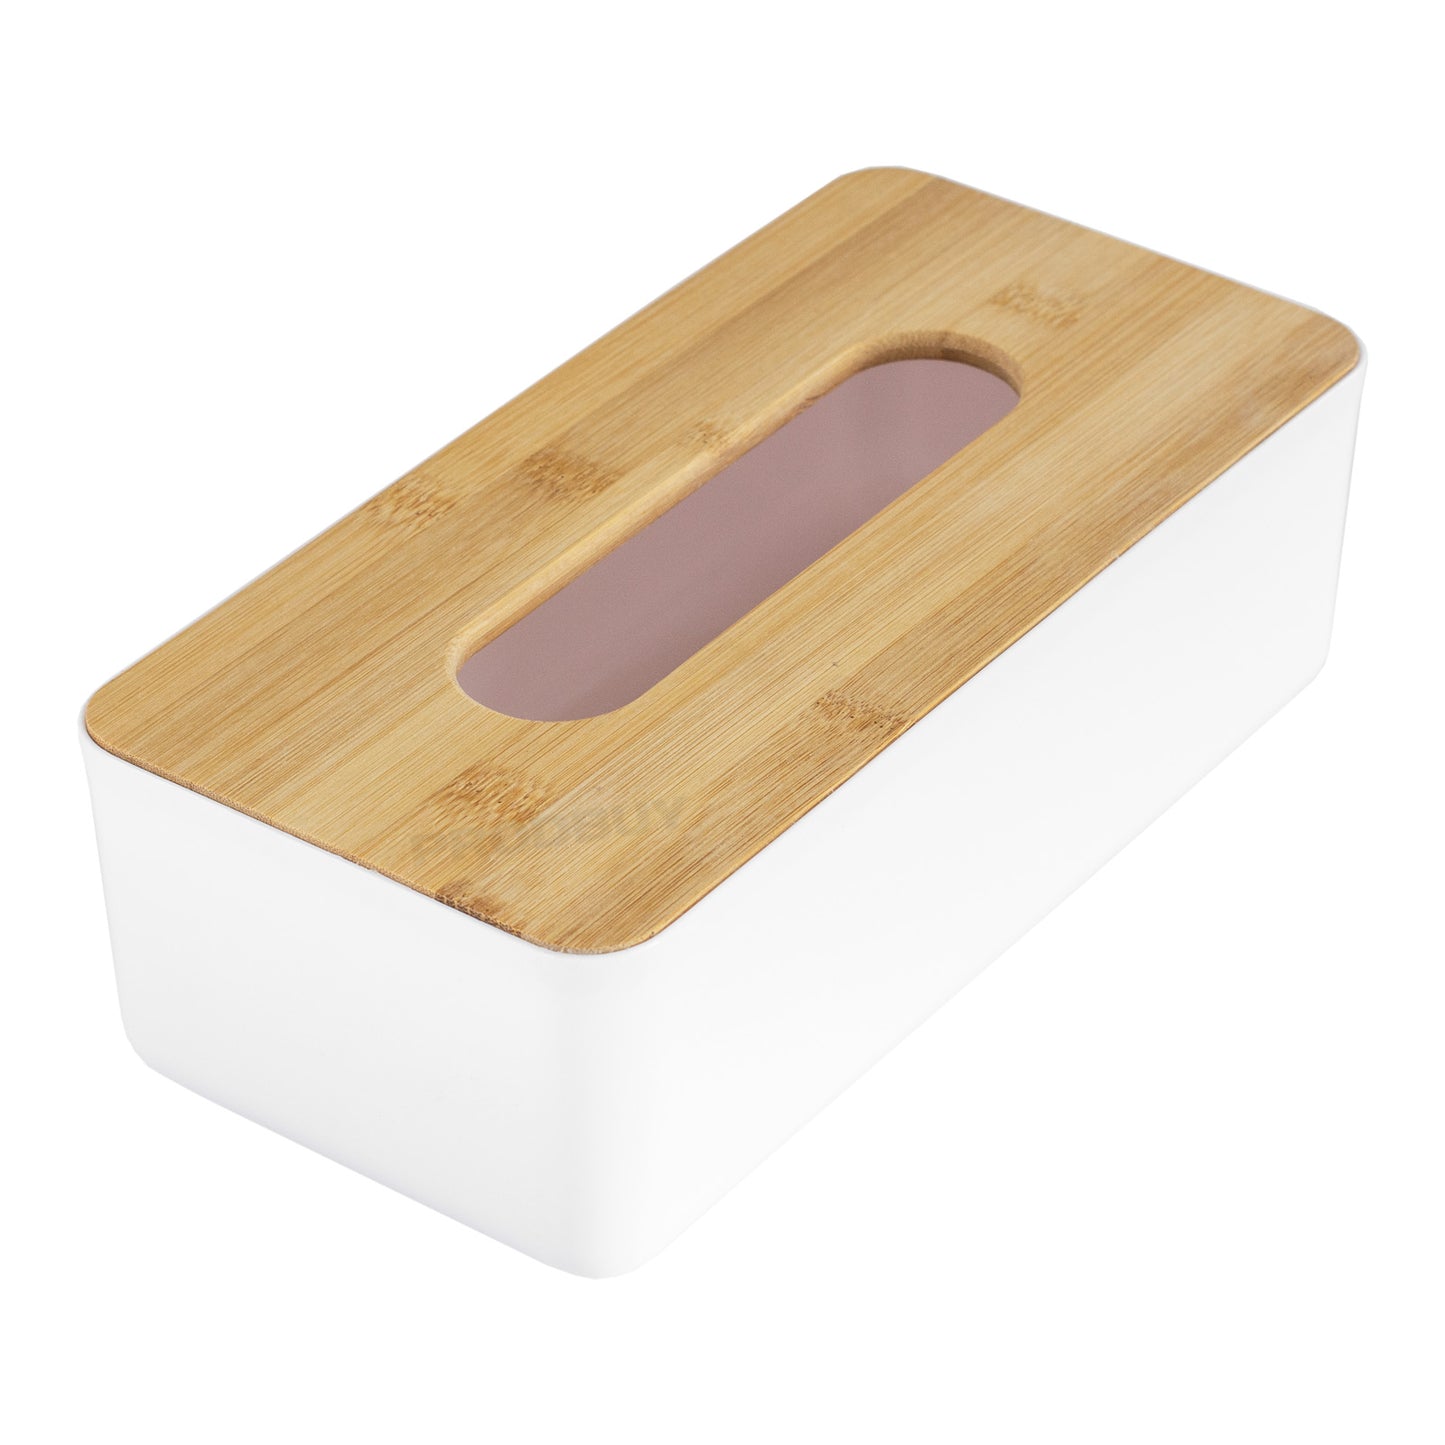 White Plastic Tissue Box Cover with Bamboo Lid